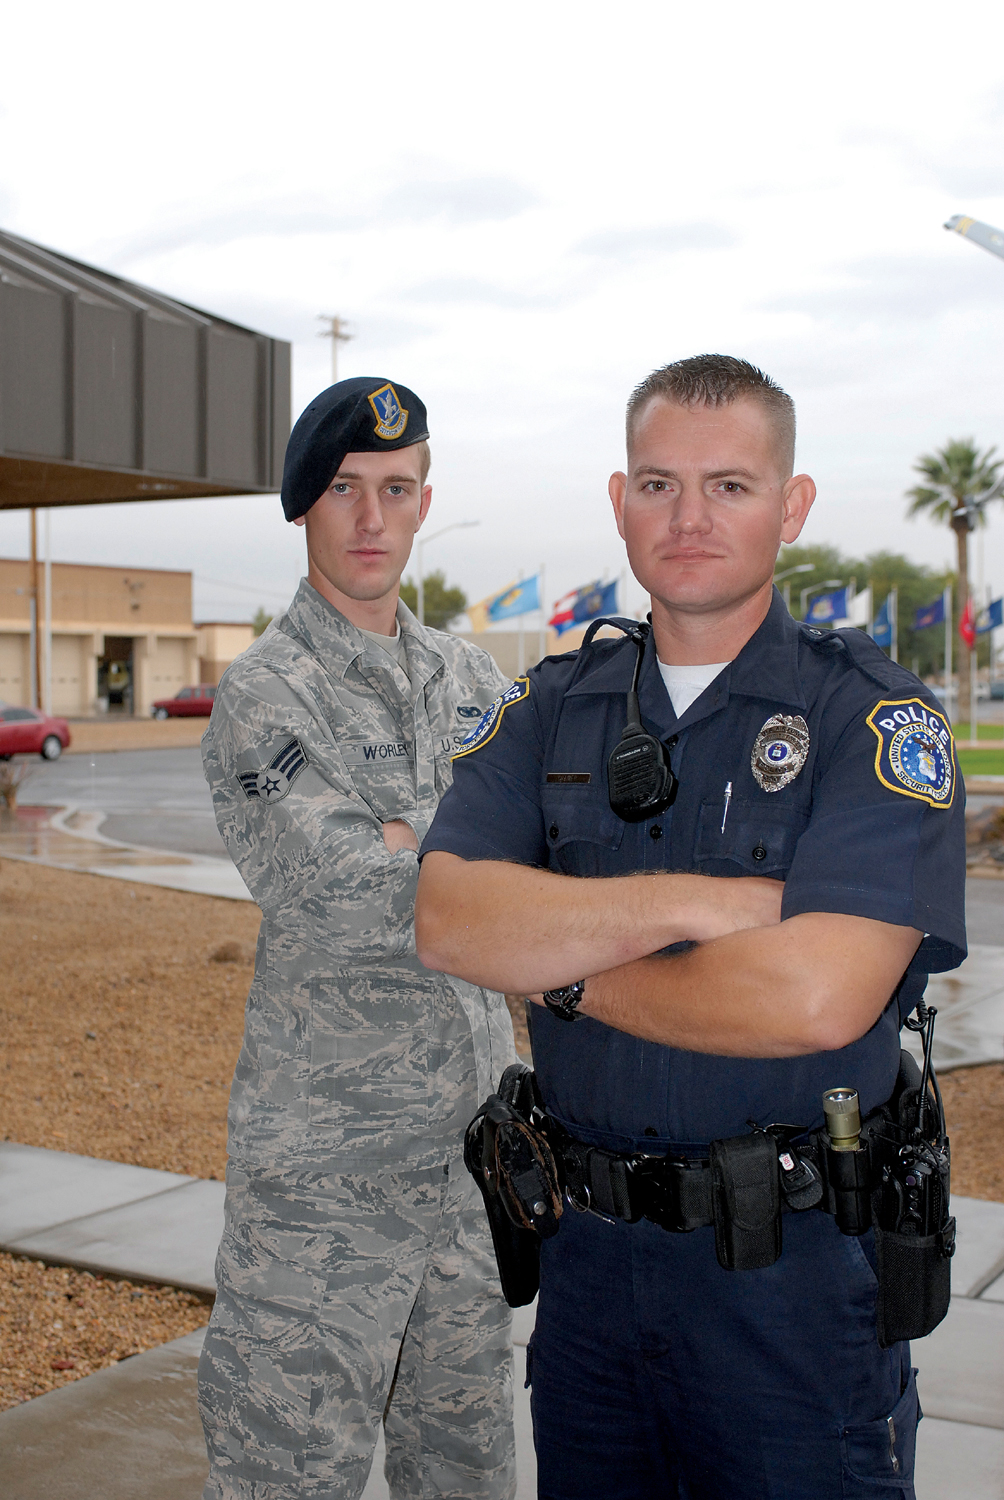 Teamwork leads to capture of criminals > Luke Air Force Base > Article